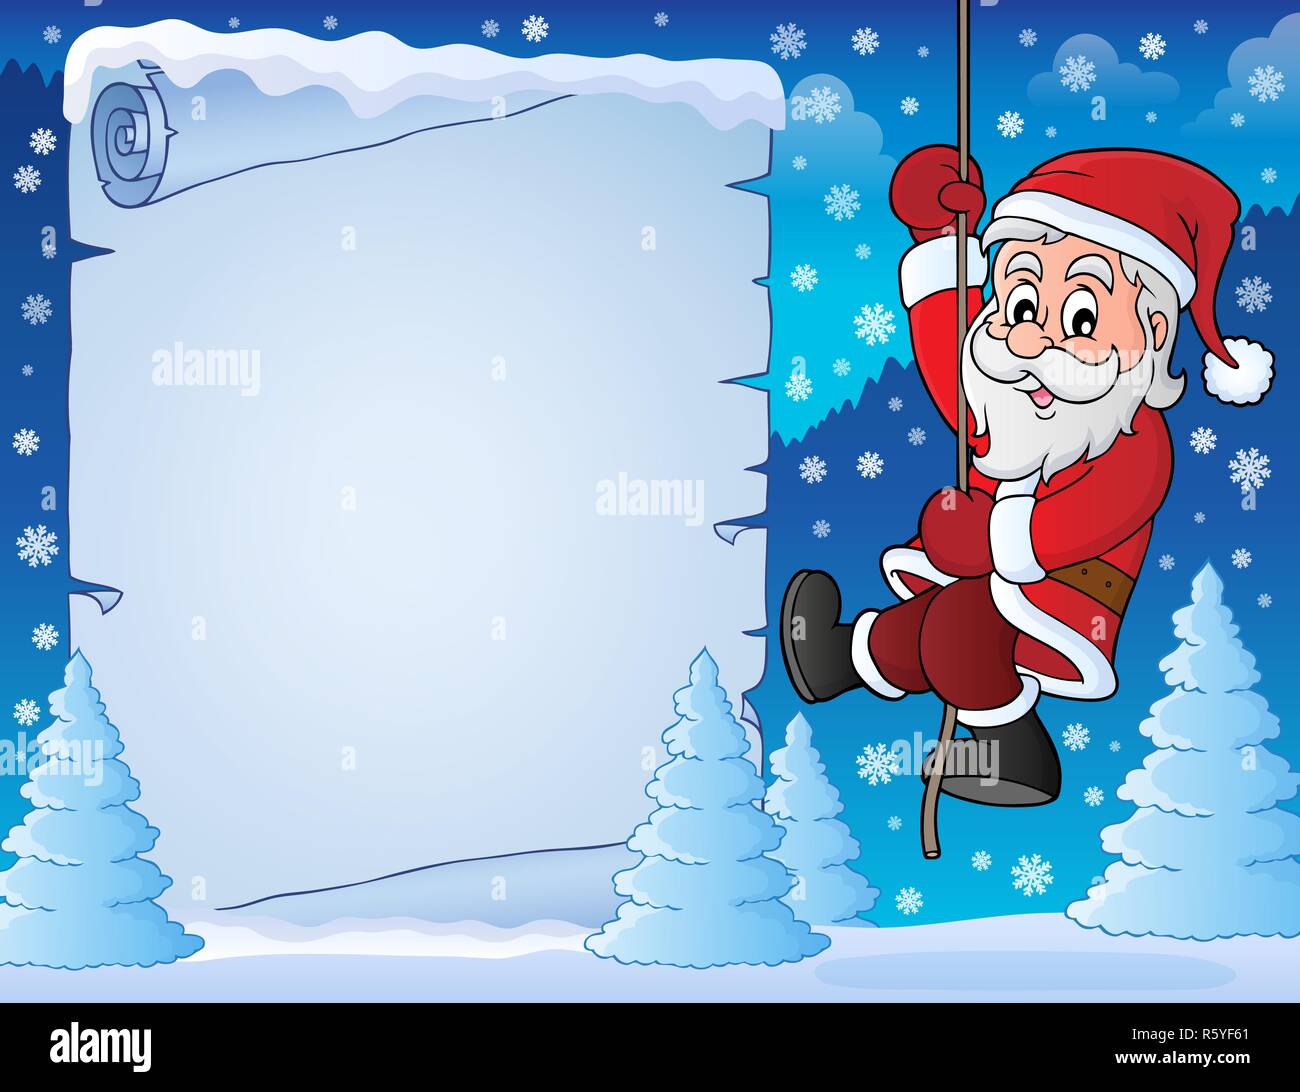 Christmas wrap paper design with trees and Santa Claus. Xmas gift wrapping  background with snow and gifts., Stock vector